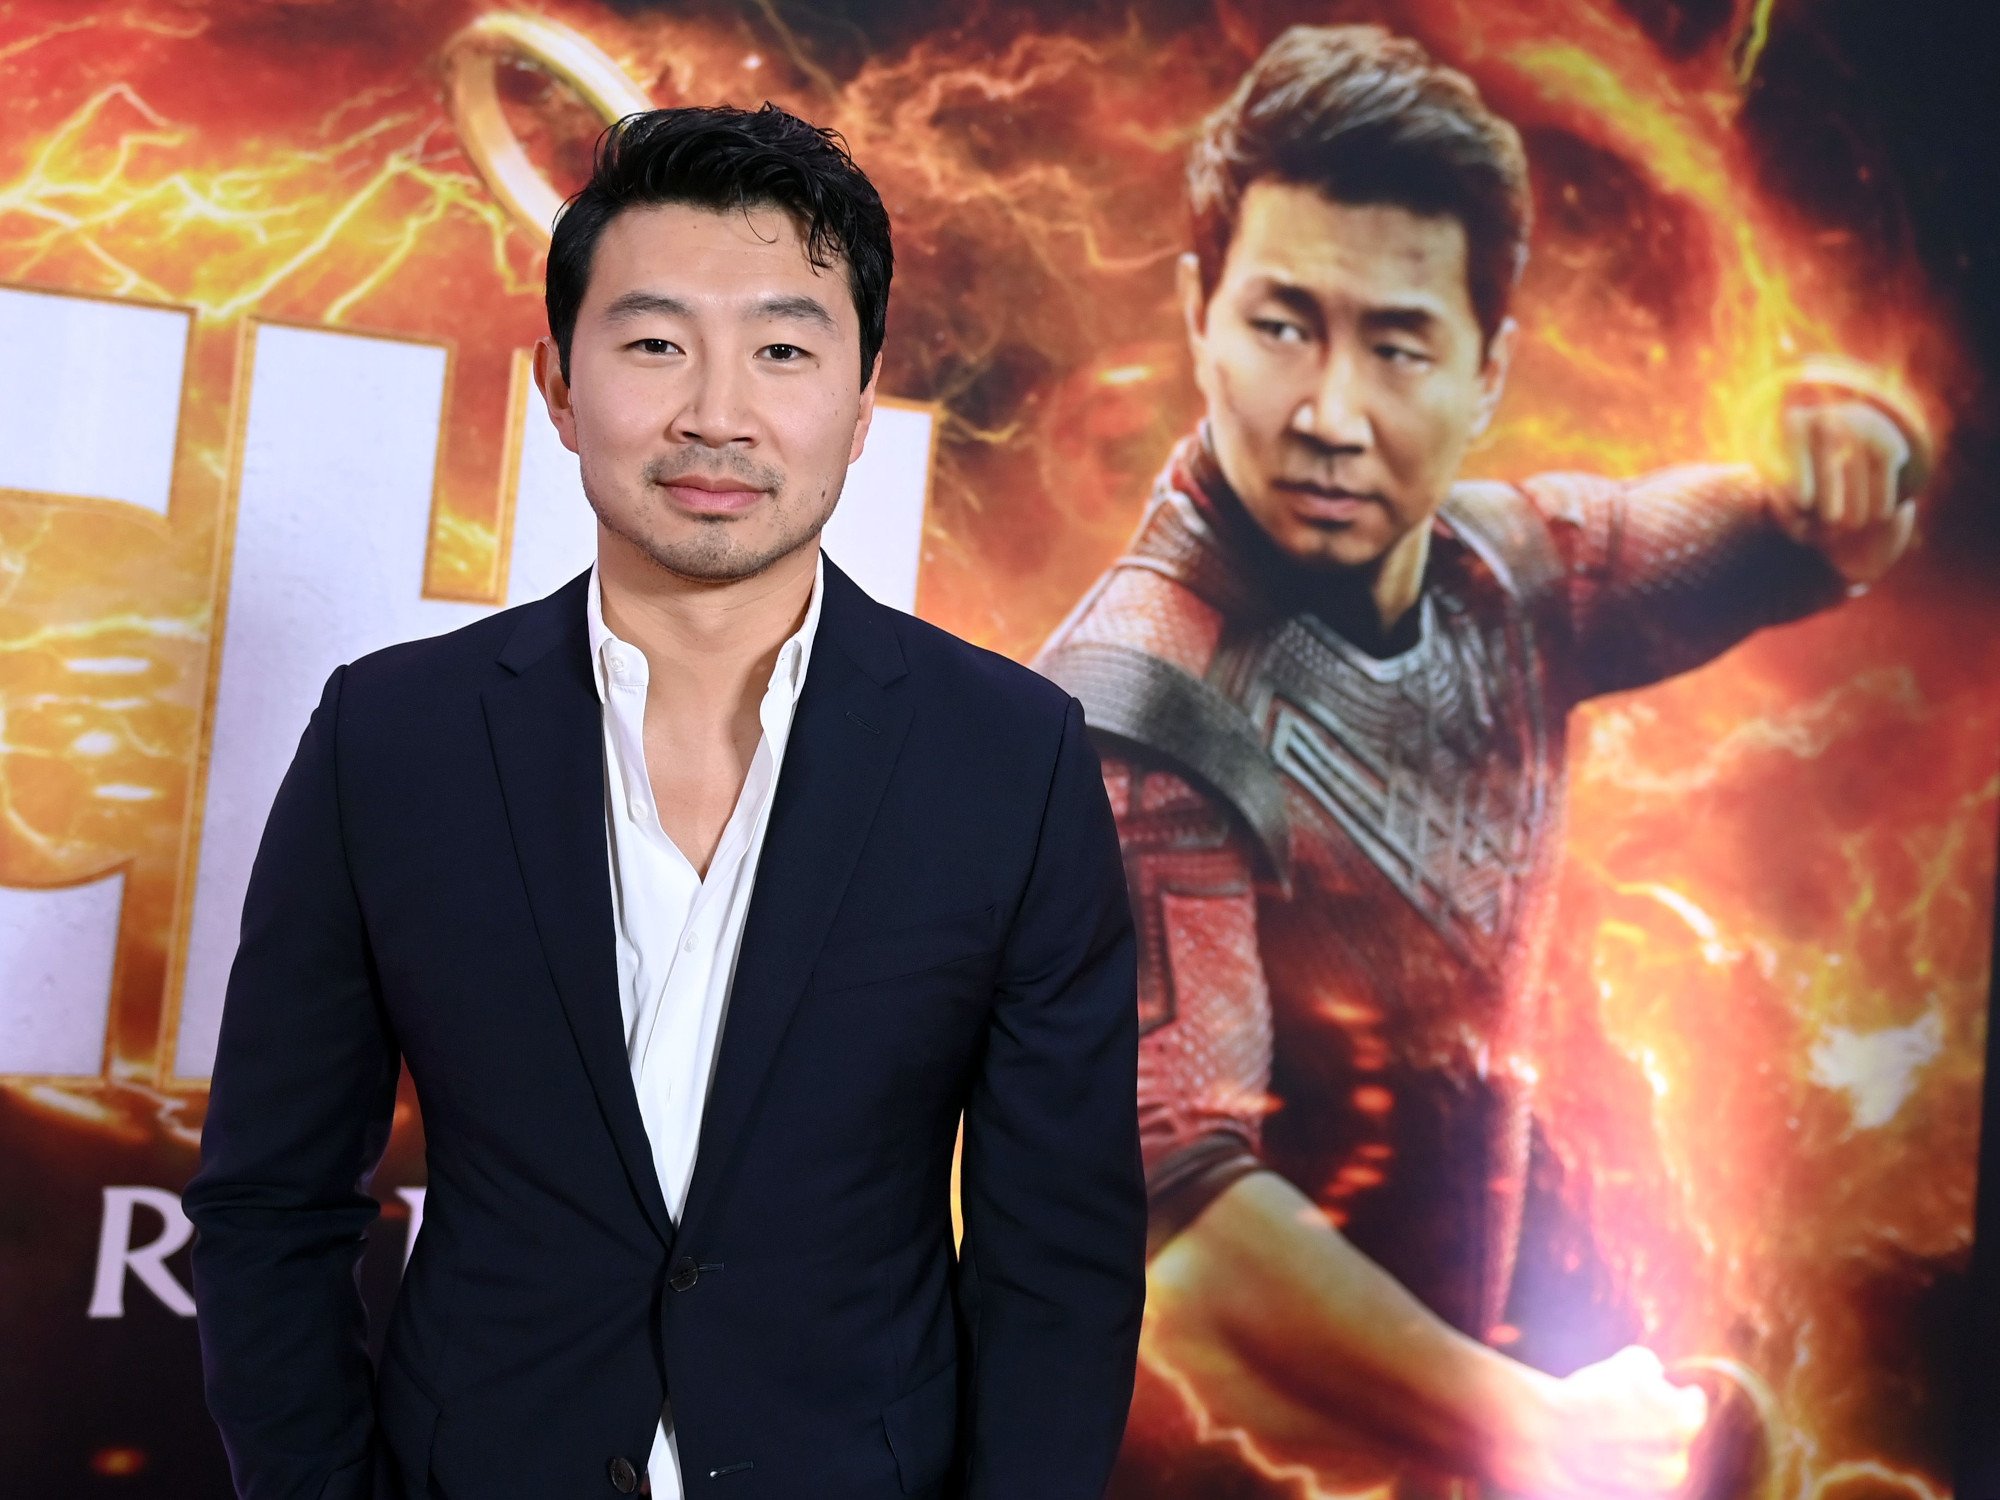 'Shang-Chi and the Legend of the Ten Rings' star Simu Liu. He's wearing a white shirt and black jacket and is standing in front of a picture of his character, Shang-Chi. Could his Marvel movie get a spinoff?